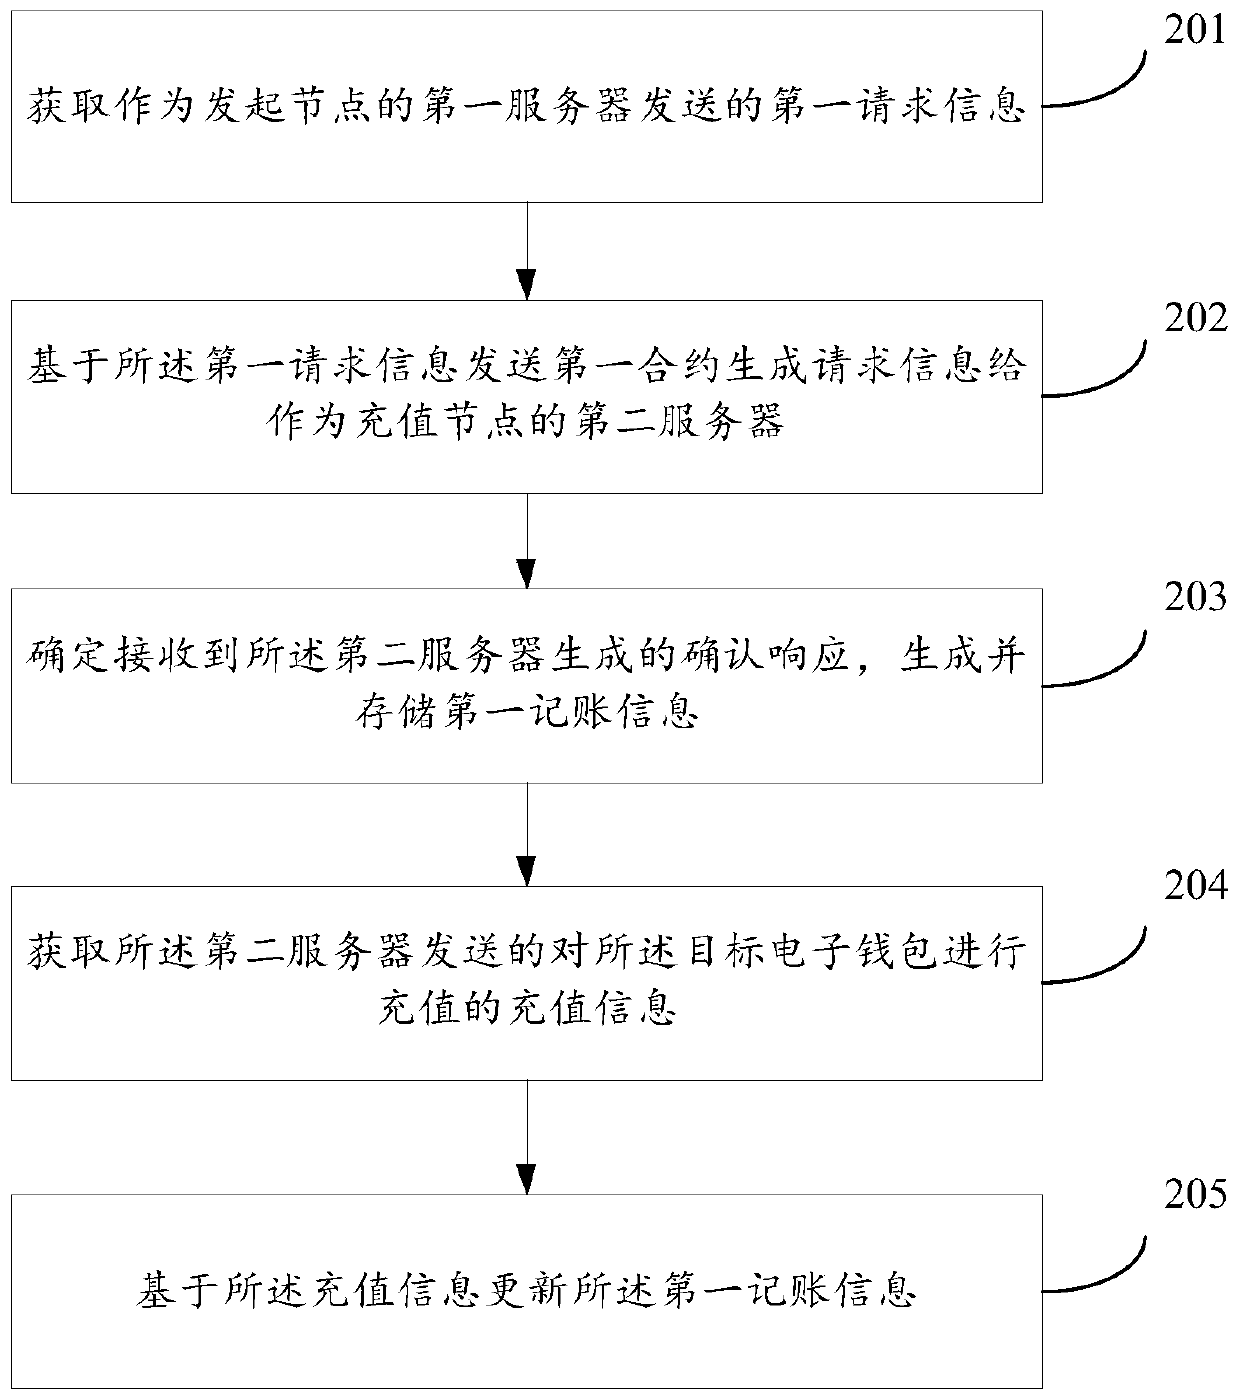 Cross-border mobile payment information processing method, device, system and storage medium